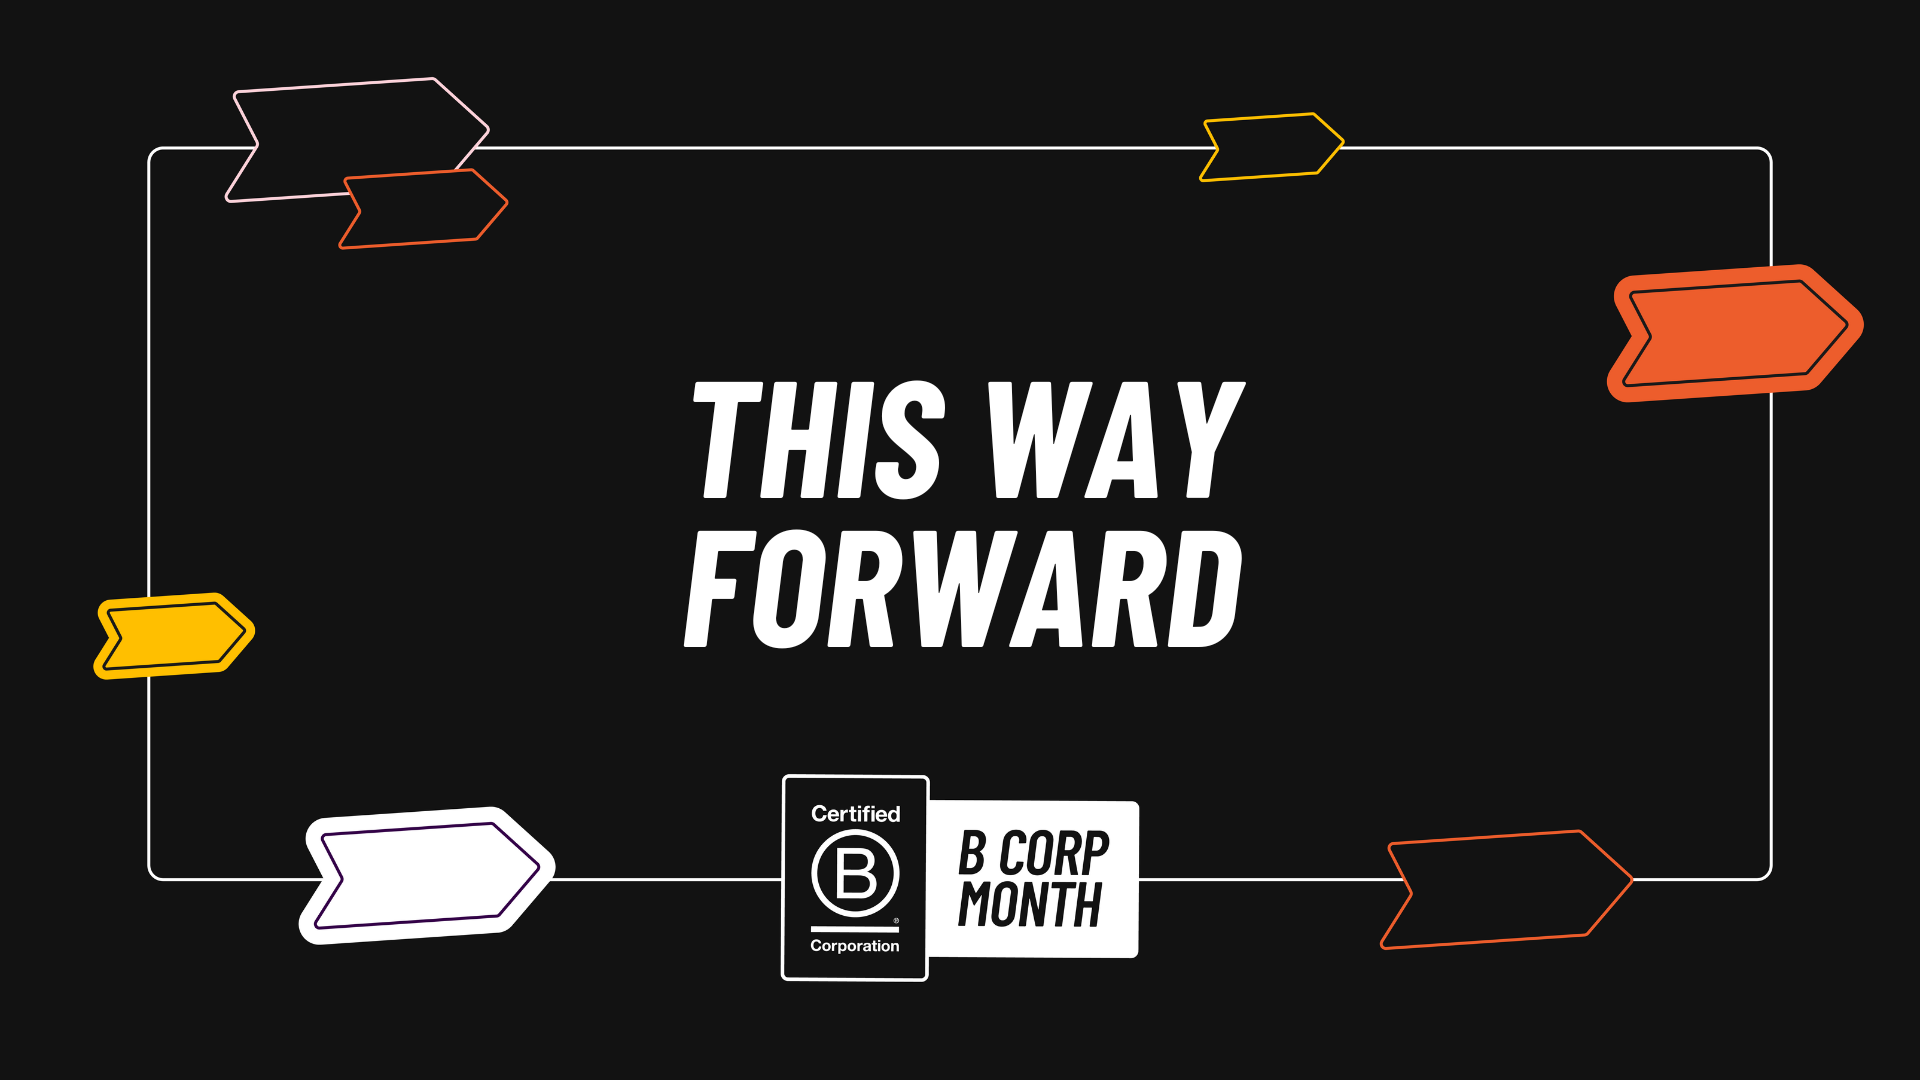 Leading with Purpose: Our Role as a B Corp